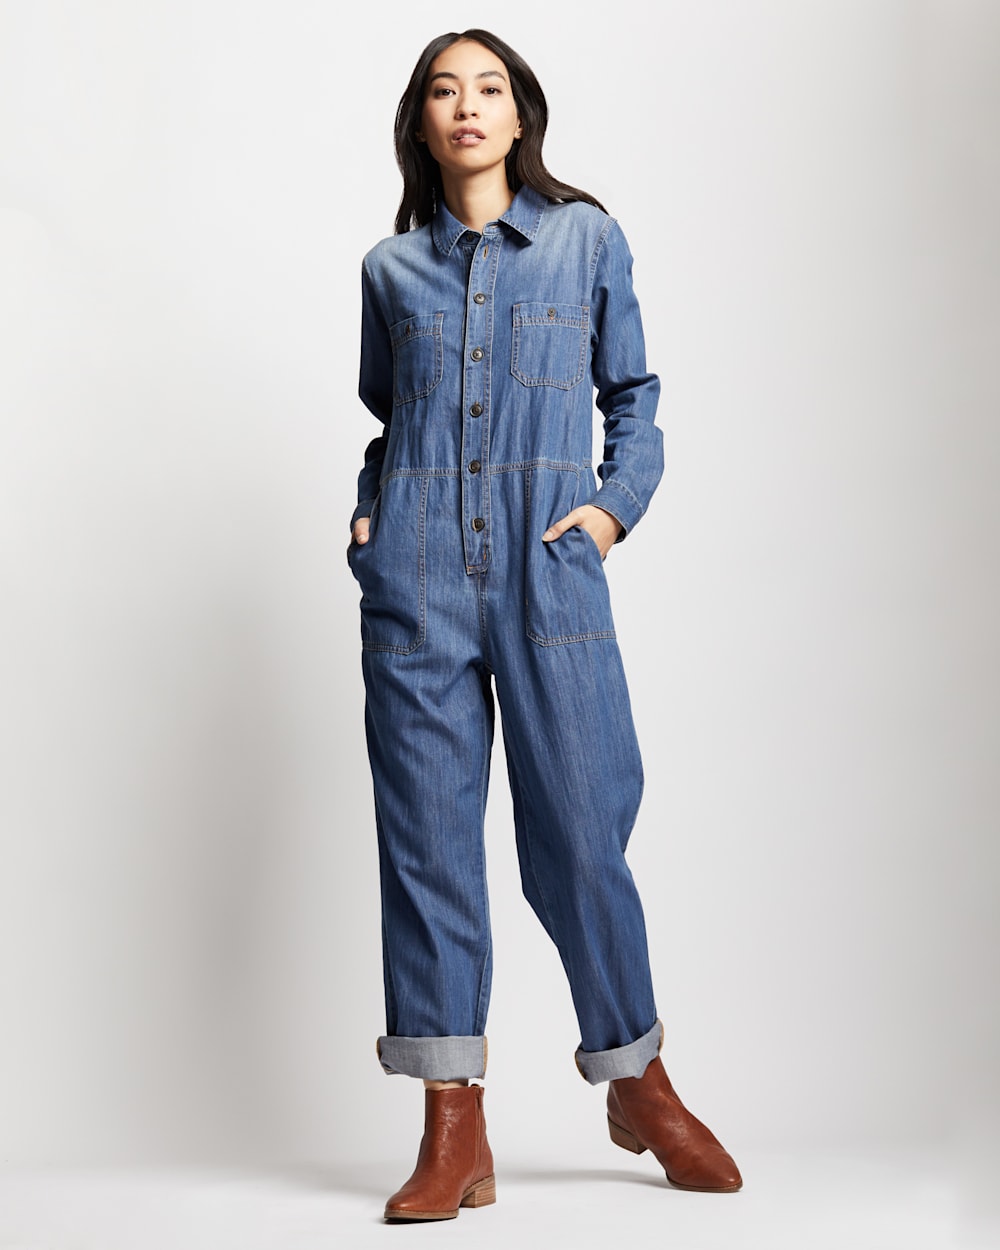 ALTERNATE VIEW OF WOMEN'S CHAMBRAY UTILITY JUMPSUIT IN MEDIUM BLUE image number 5